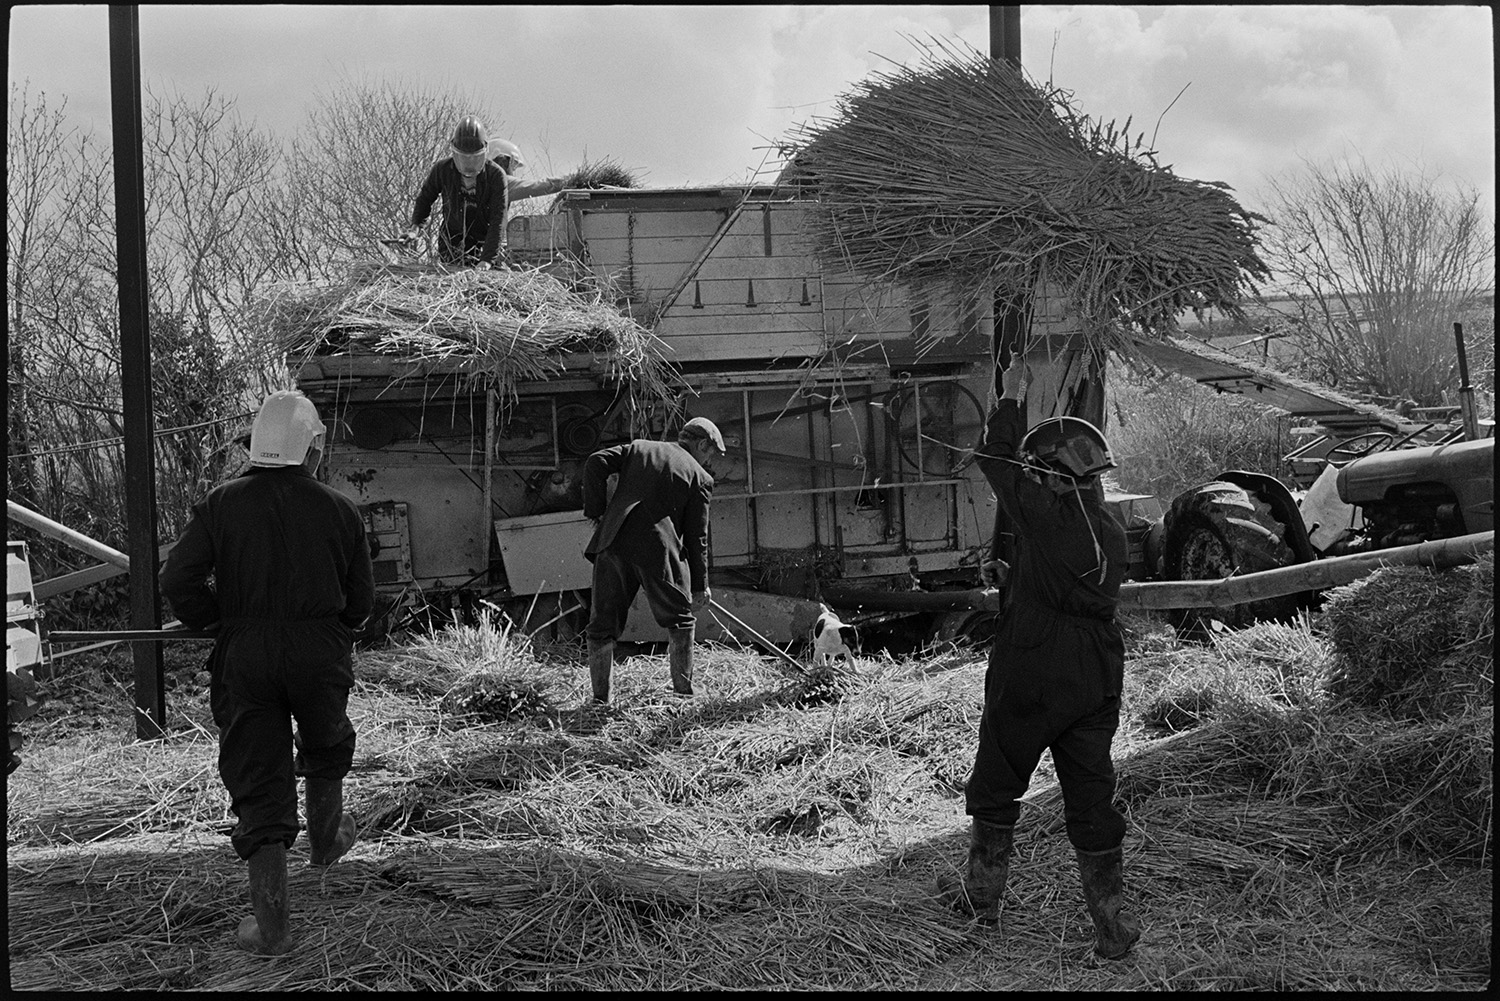 Reedcombers working from barn, loading, reed comber.
[Men loading reed from a barn on to a threshing machine or reed comber at Spittle Farm, near Chulmleigh. They are using pitchforks and some men are wearing helmets or visors. A tractor and elevator are alongside the threshing machine.]